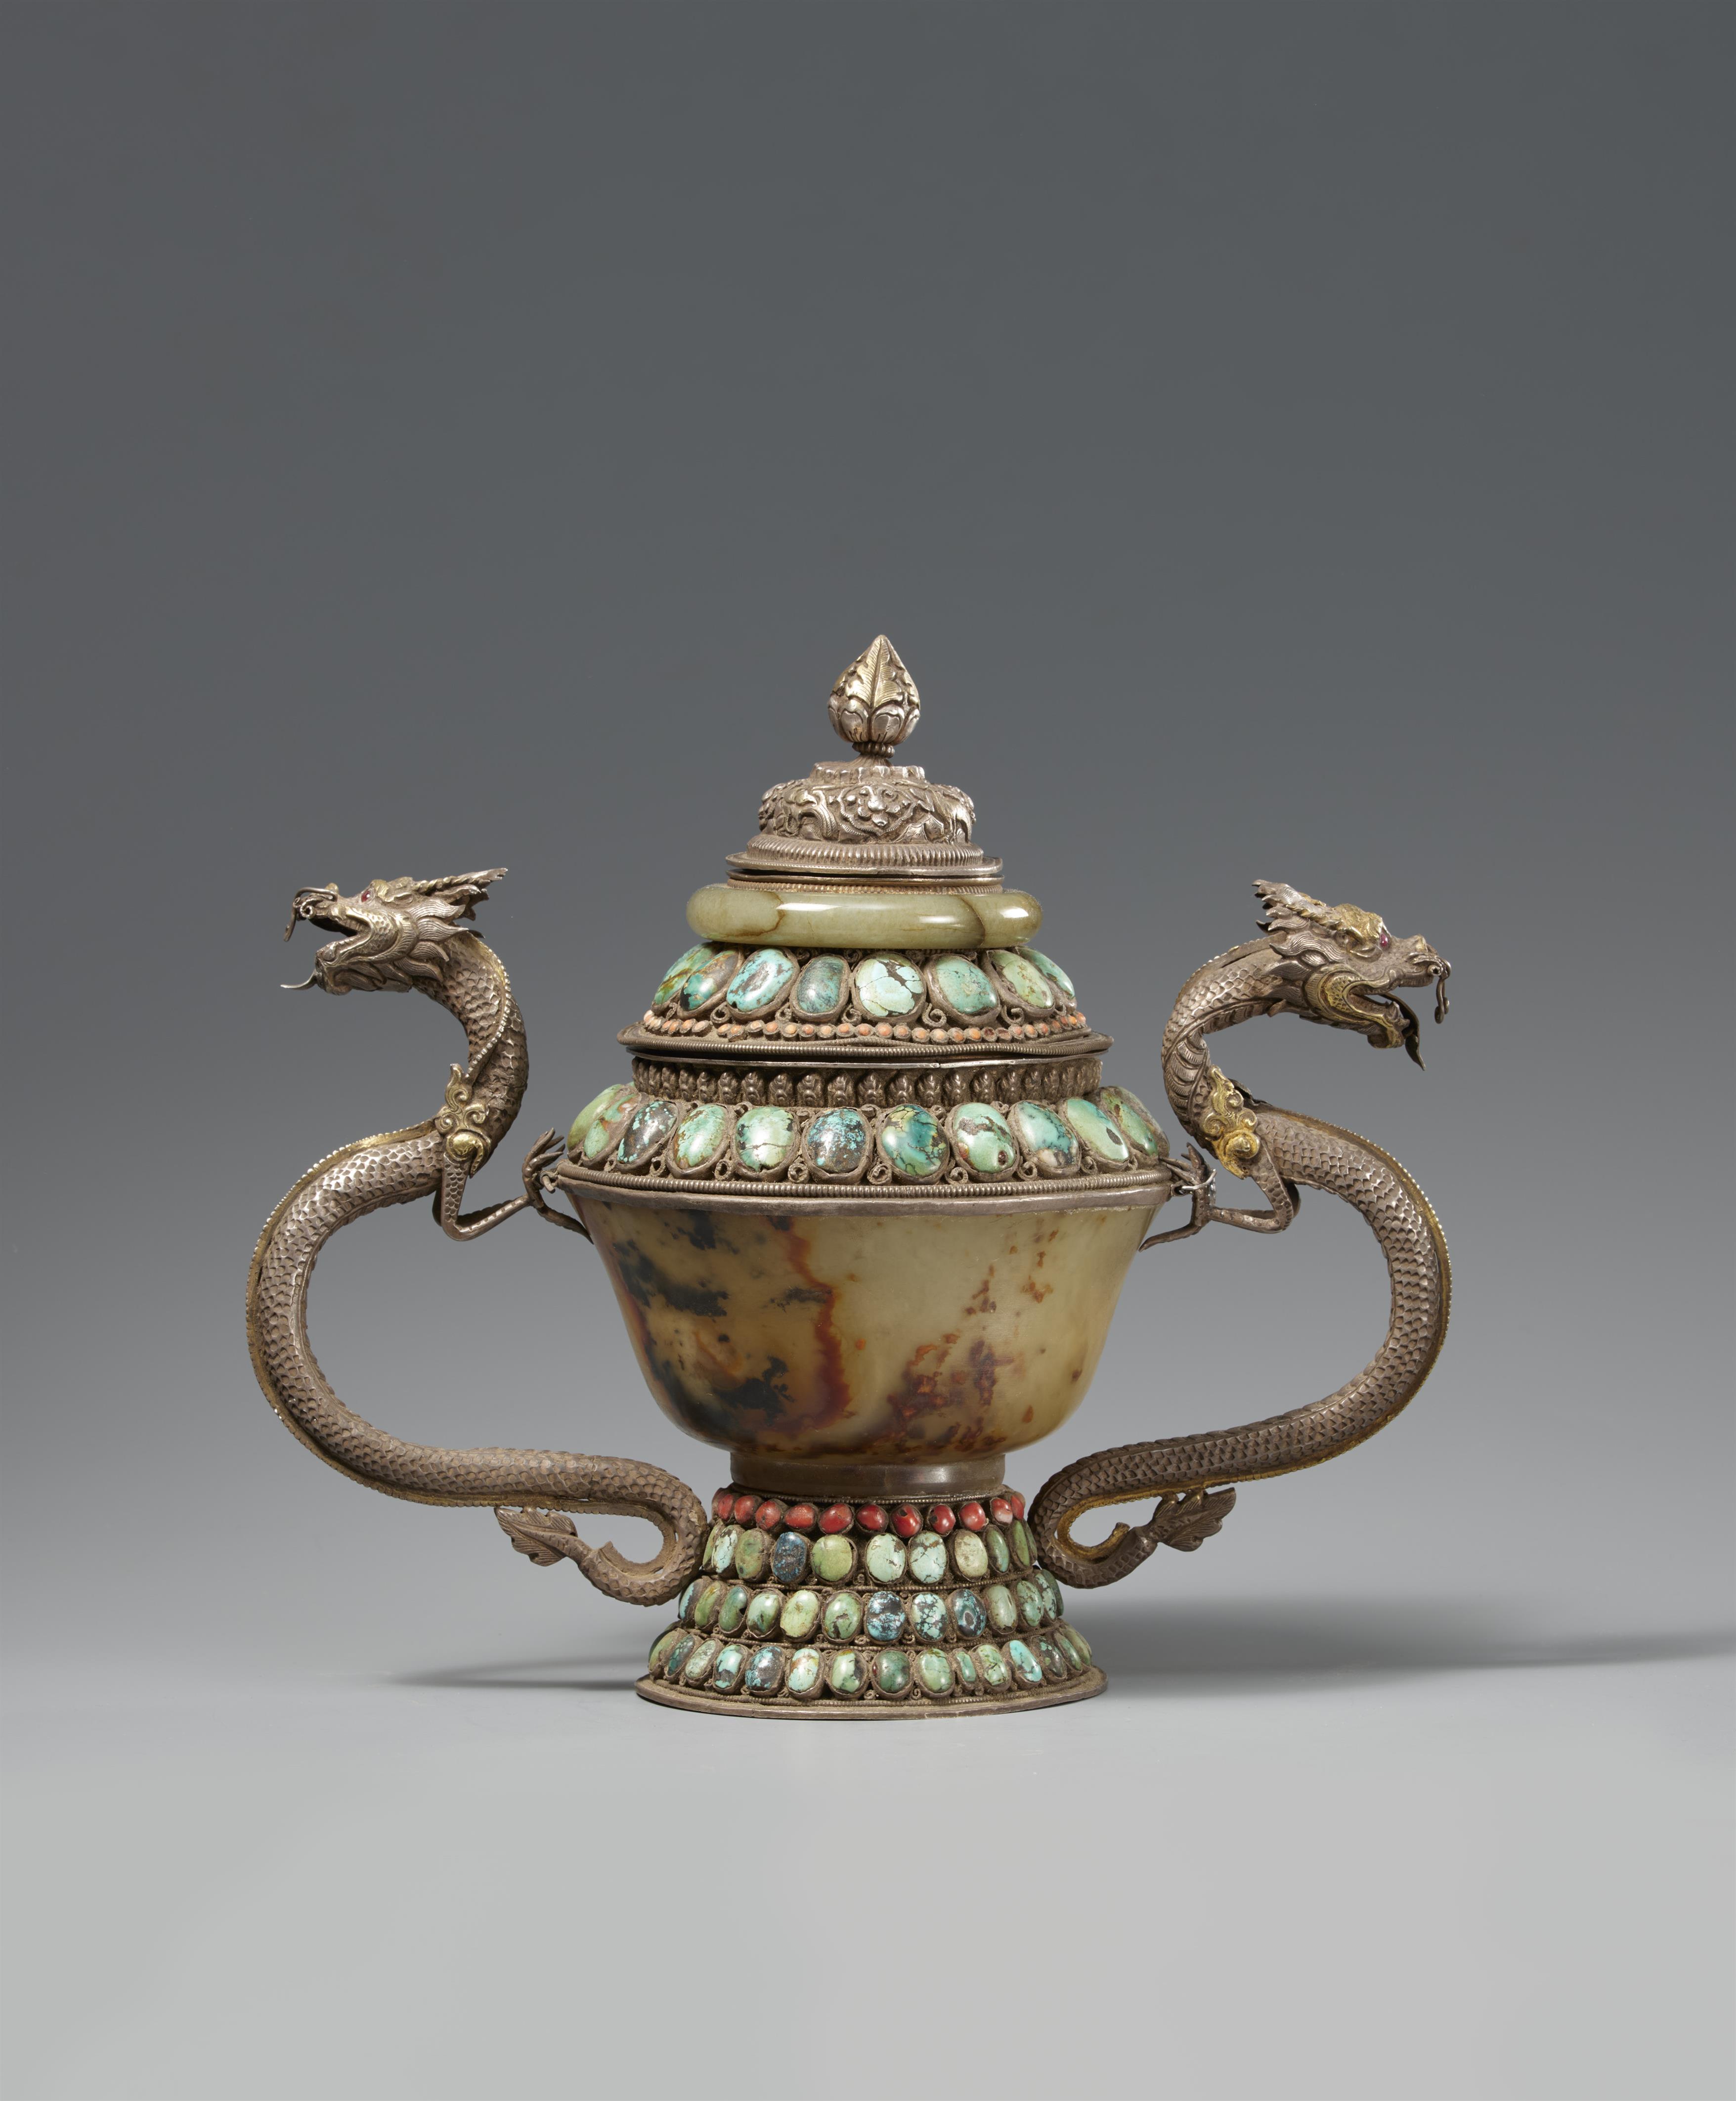 A silver-mounted and inlaid turquoise, coral and jade-embellished bowl and cover. Tibet, 19th/20th century - image-3